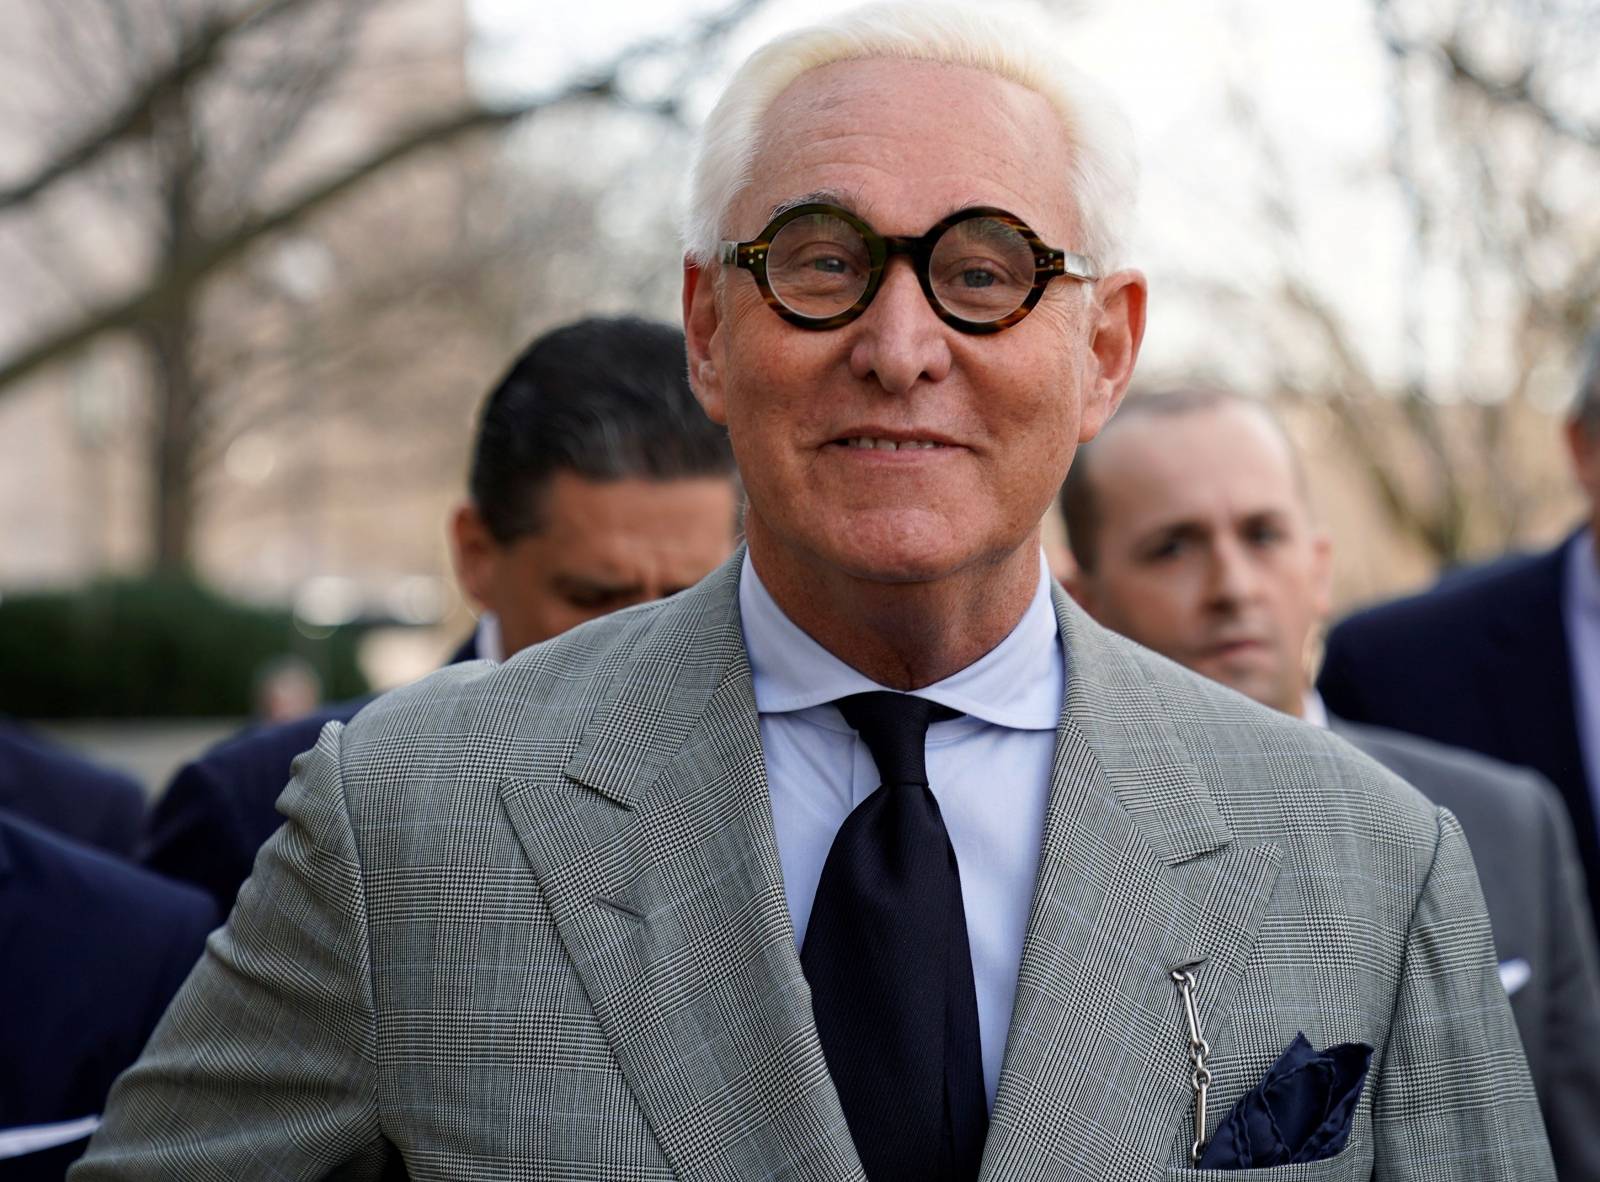 FILE PHOTO: Roger Stone departs after status hearing at U.S. District Court in Washington